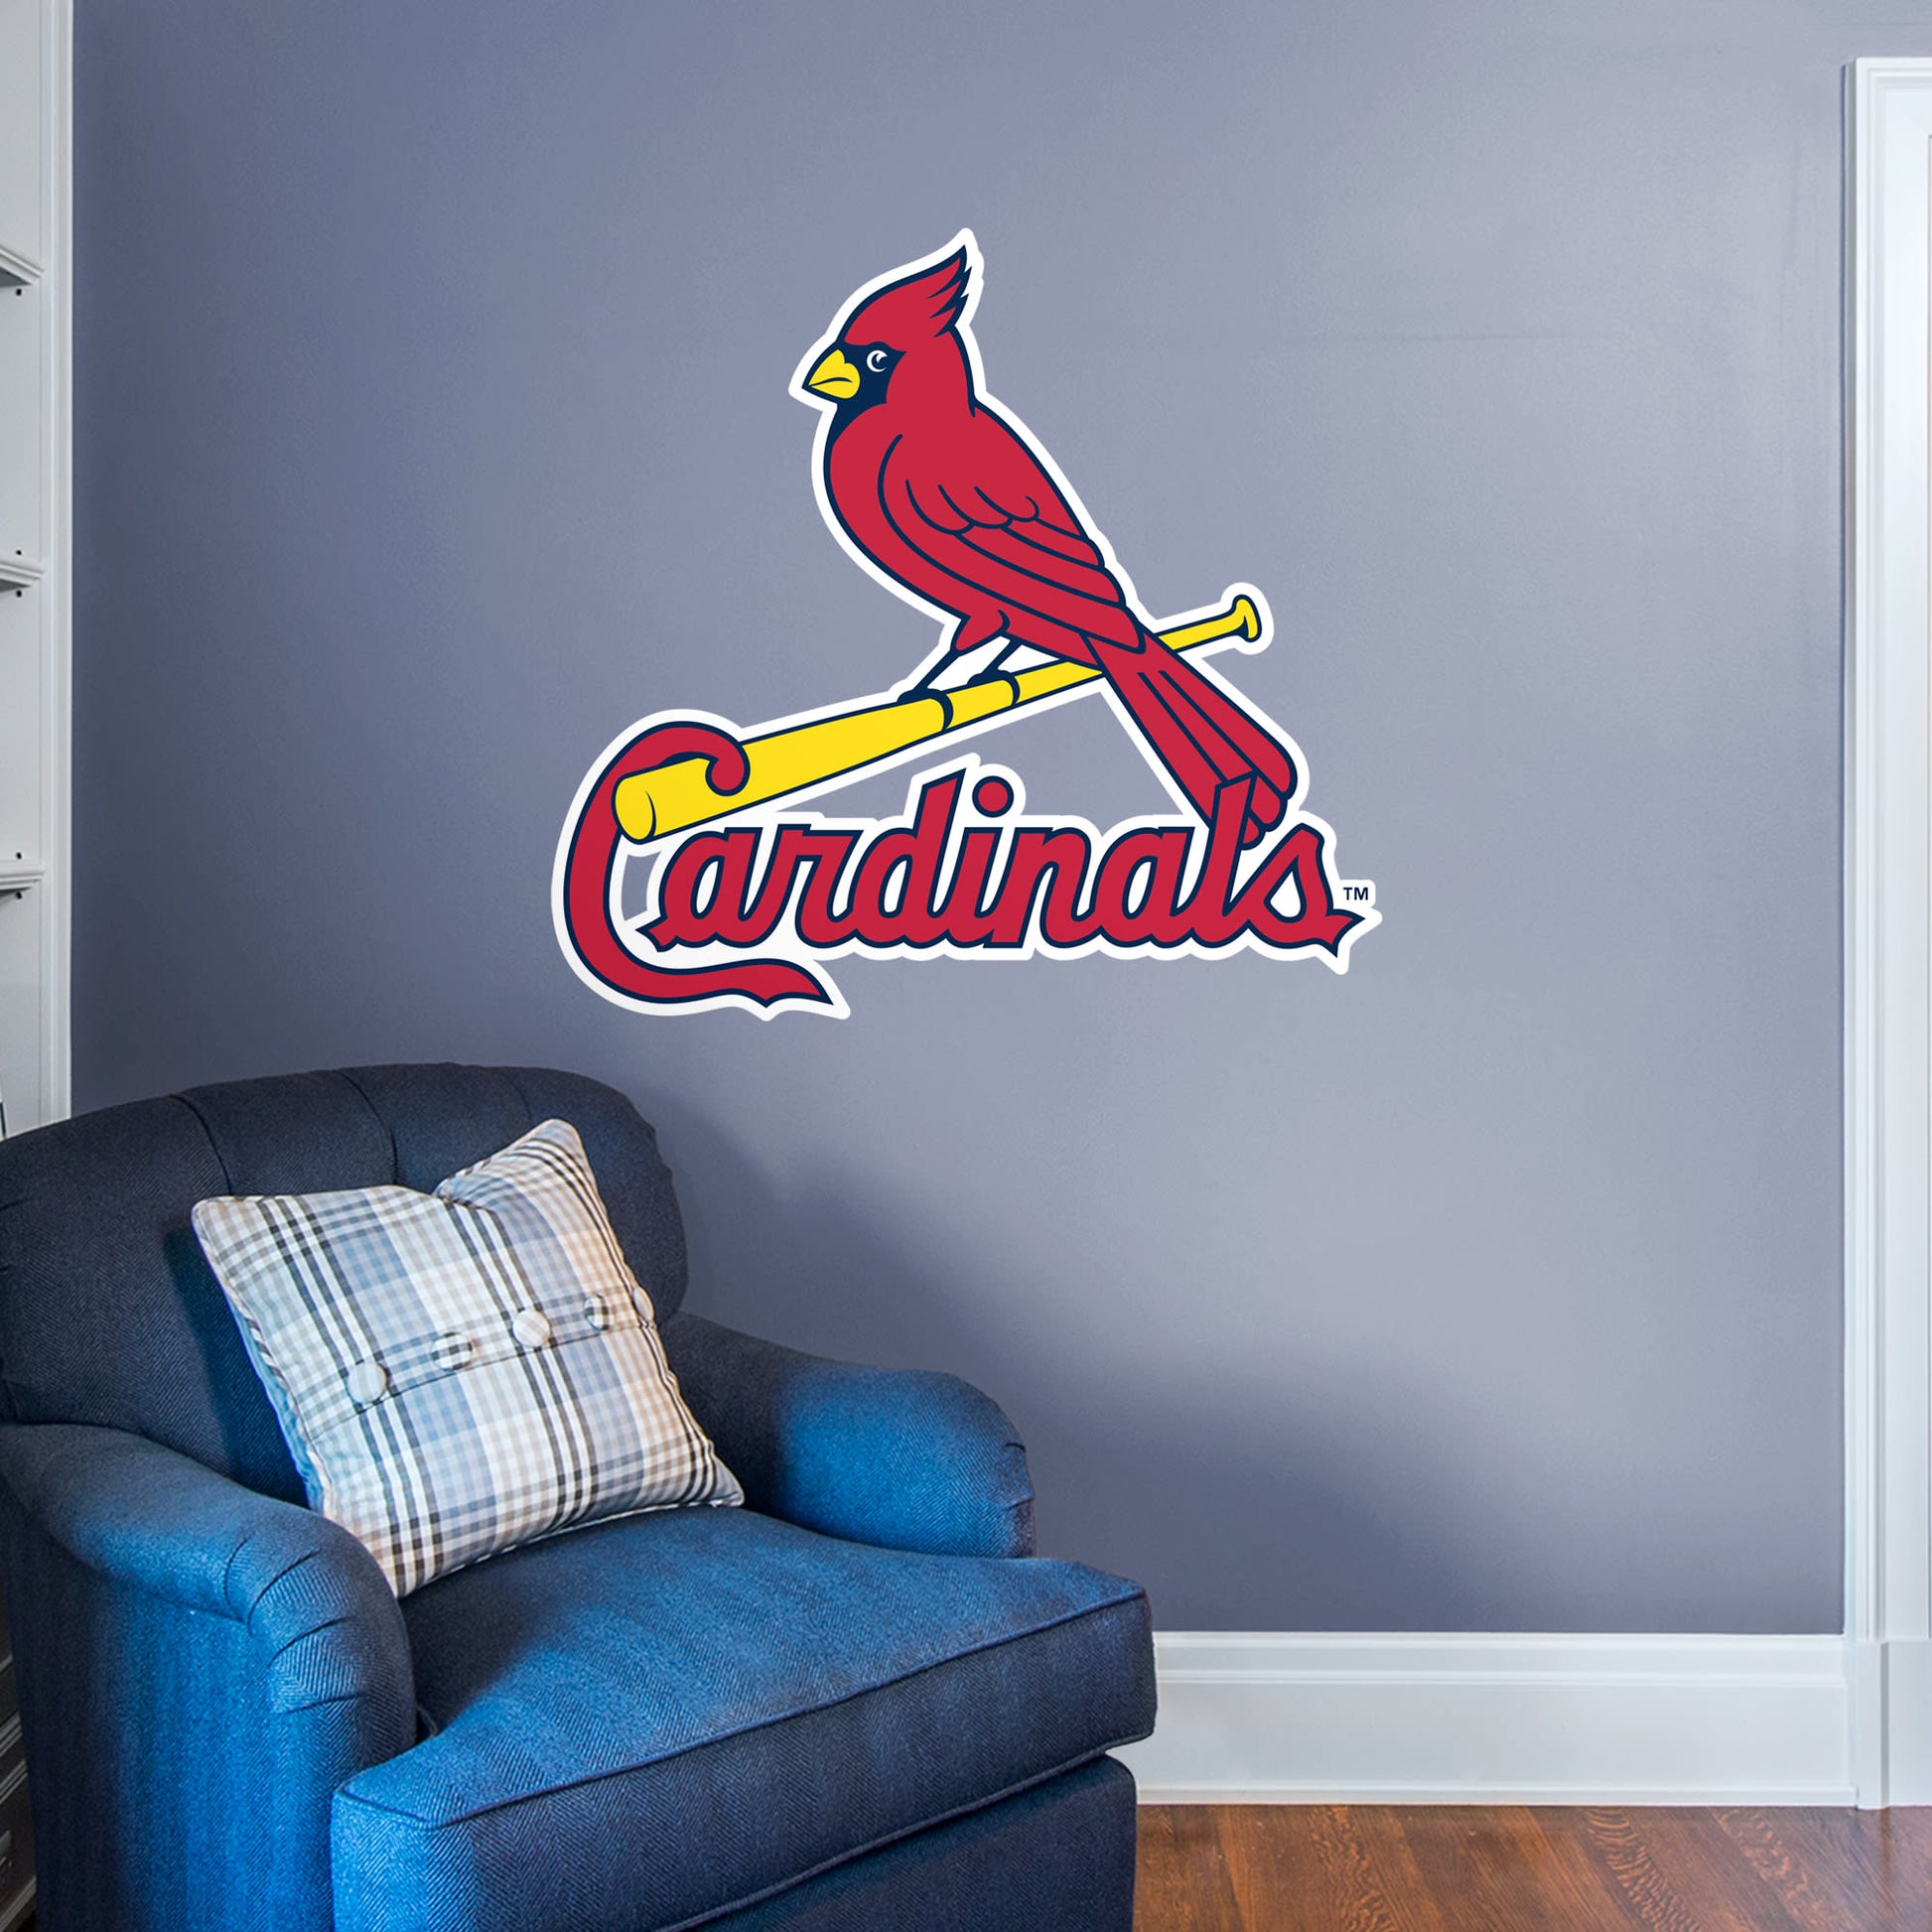 How to Make Your Own Stickers - Create Custom Stickers With Fathead